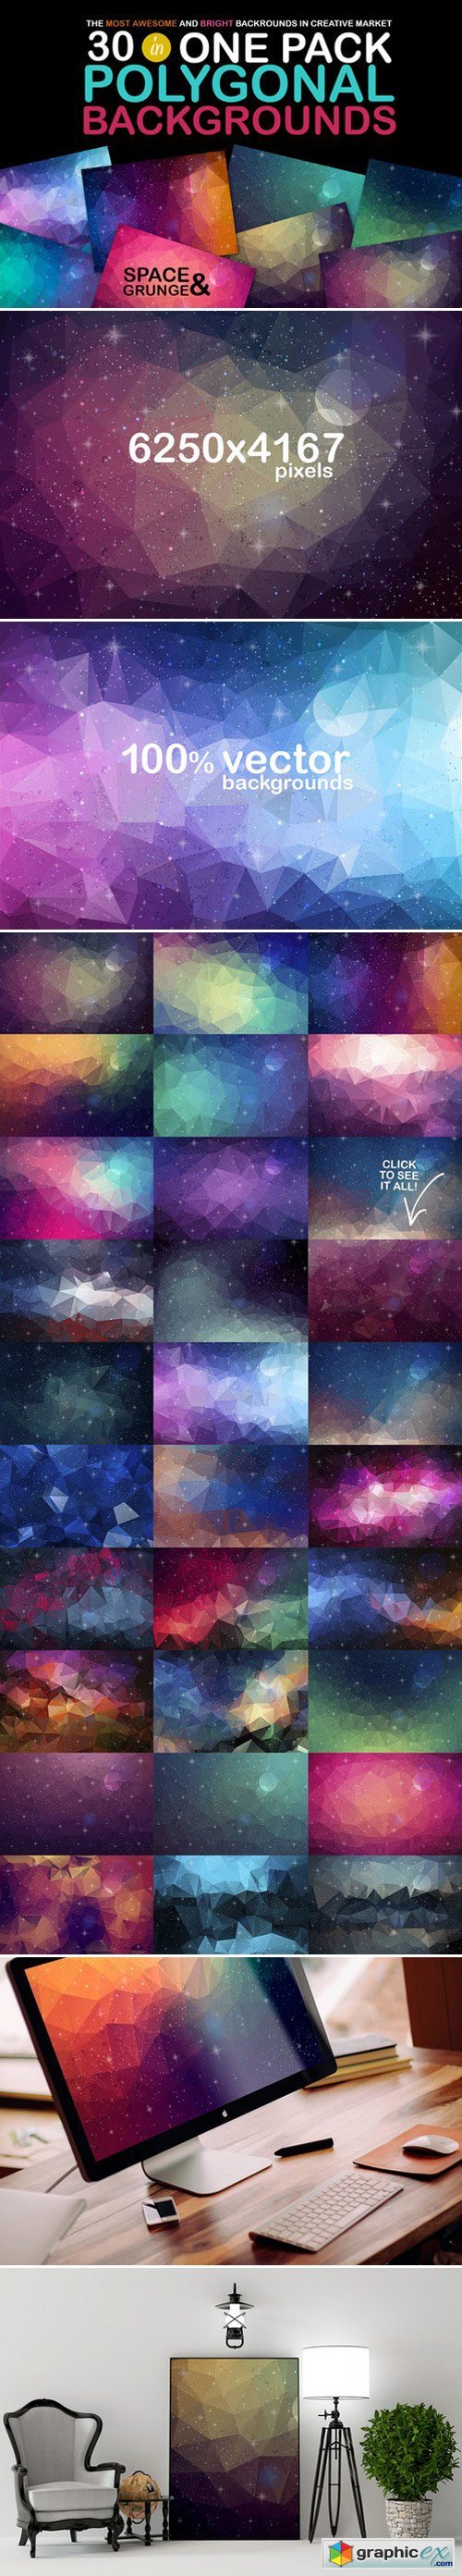 CM - Polygonal Space Backgrounds 430458